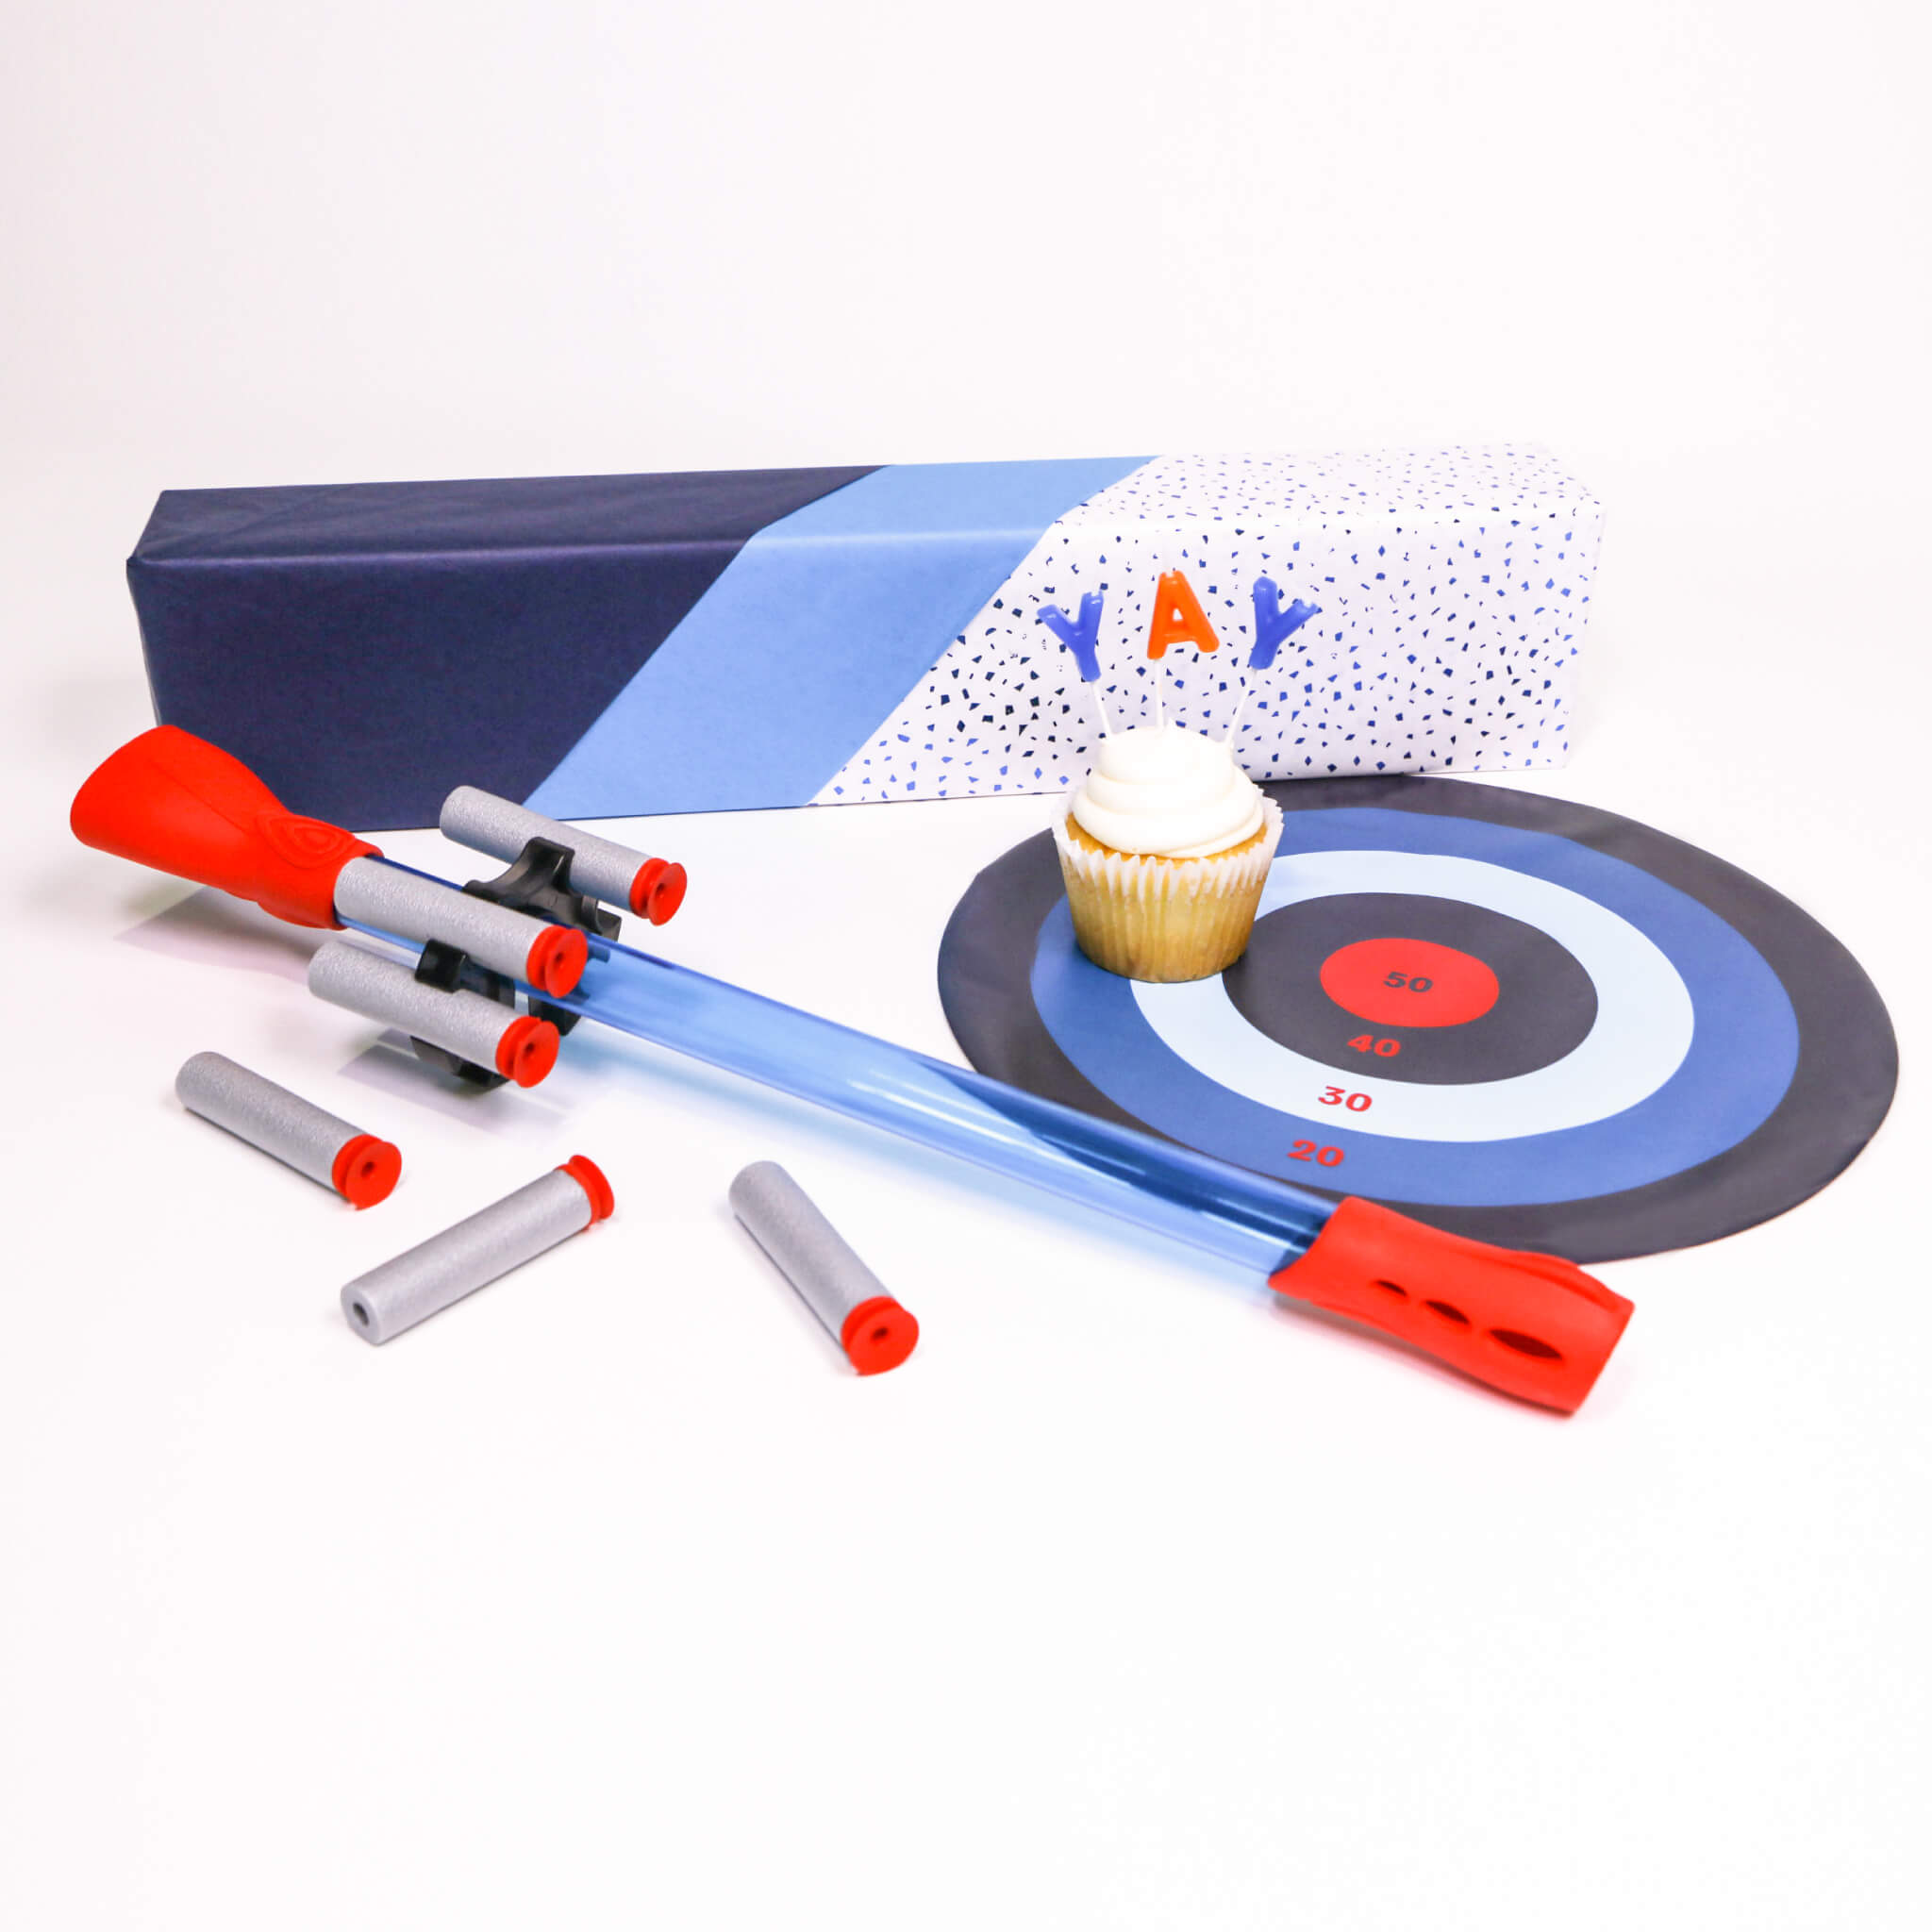 Blow Darts target set gift by Mighty Fun! Includes 6 darts, ammo holder and target.